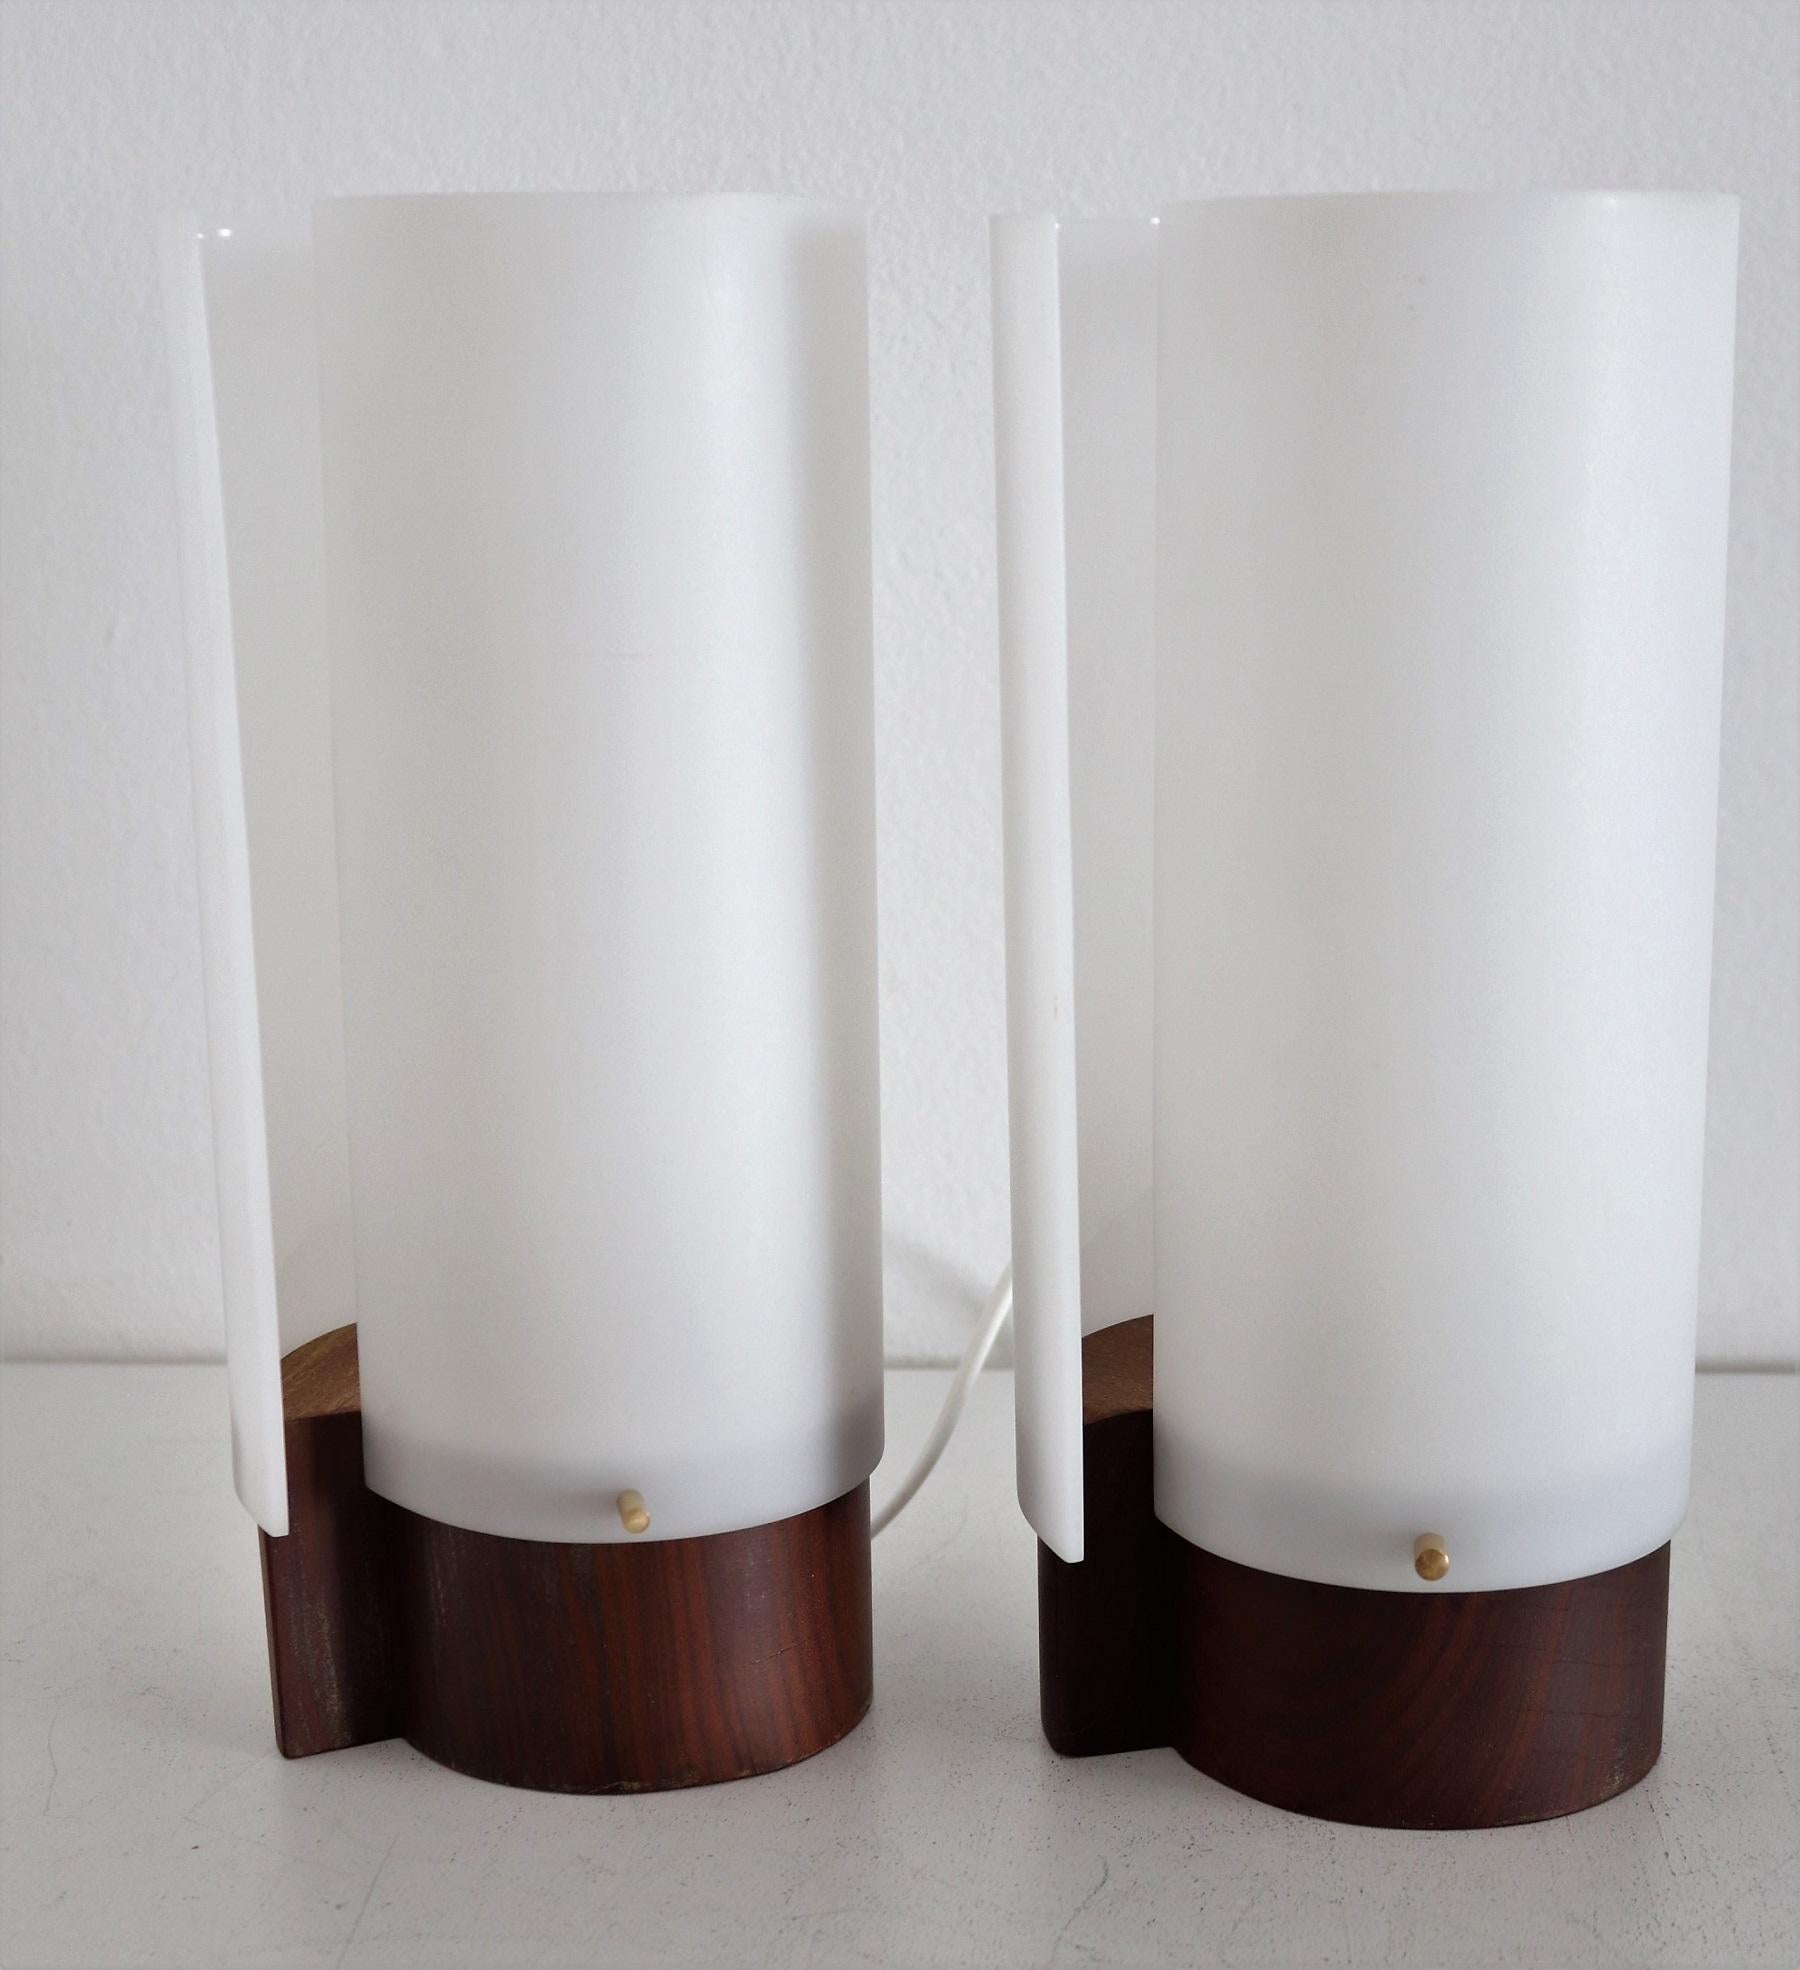 Italian Modernist Teakwood Table Lamps with Methacrylic Curved Shades, 1950s In Good Condition For Sale In Morazzone, Varese